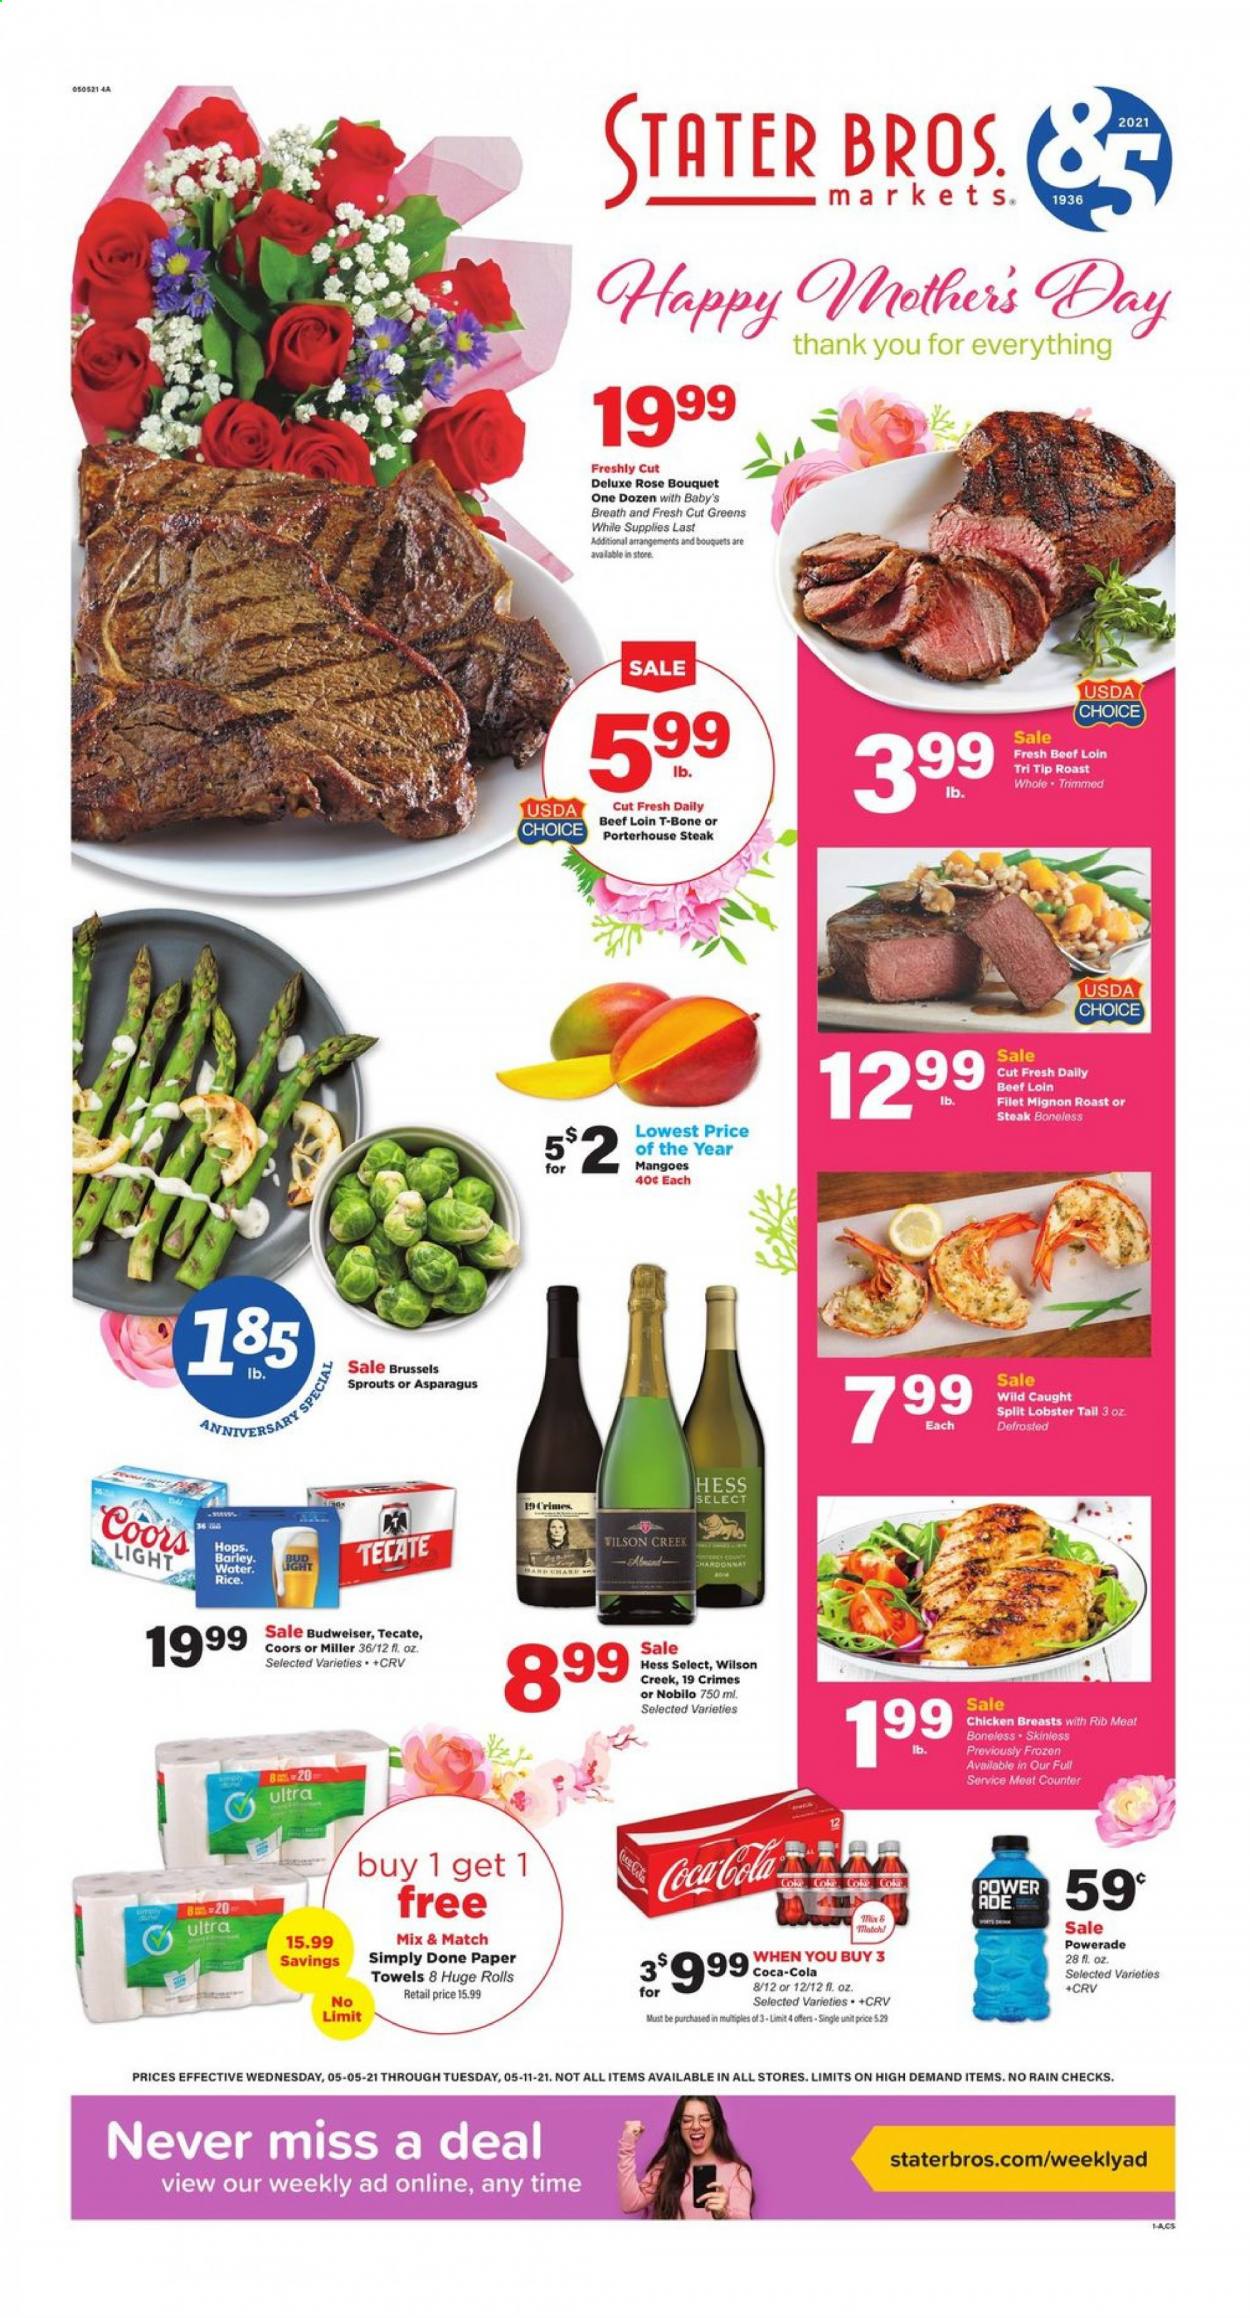 thumbnail - Stater Bros. Flyer - 05/05/2021 - 05/11/2021 - Sales products - Budweiser, Coors, asparagus, mango, lobster, lobster tail, rice, Coca-Cola, Powerade, white wine, Chardonnay, wine, rosé wine, beer, Miller, chicken breasts, beef meat, t-bone steak, steak, beef tenderloin, kitchen towels, paper towels. Page 1.